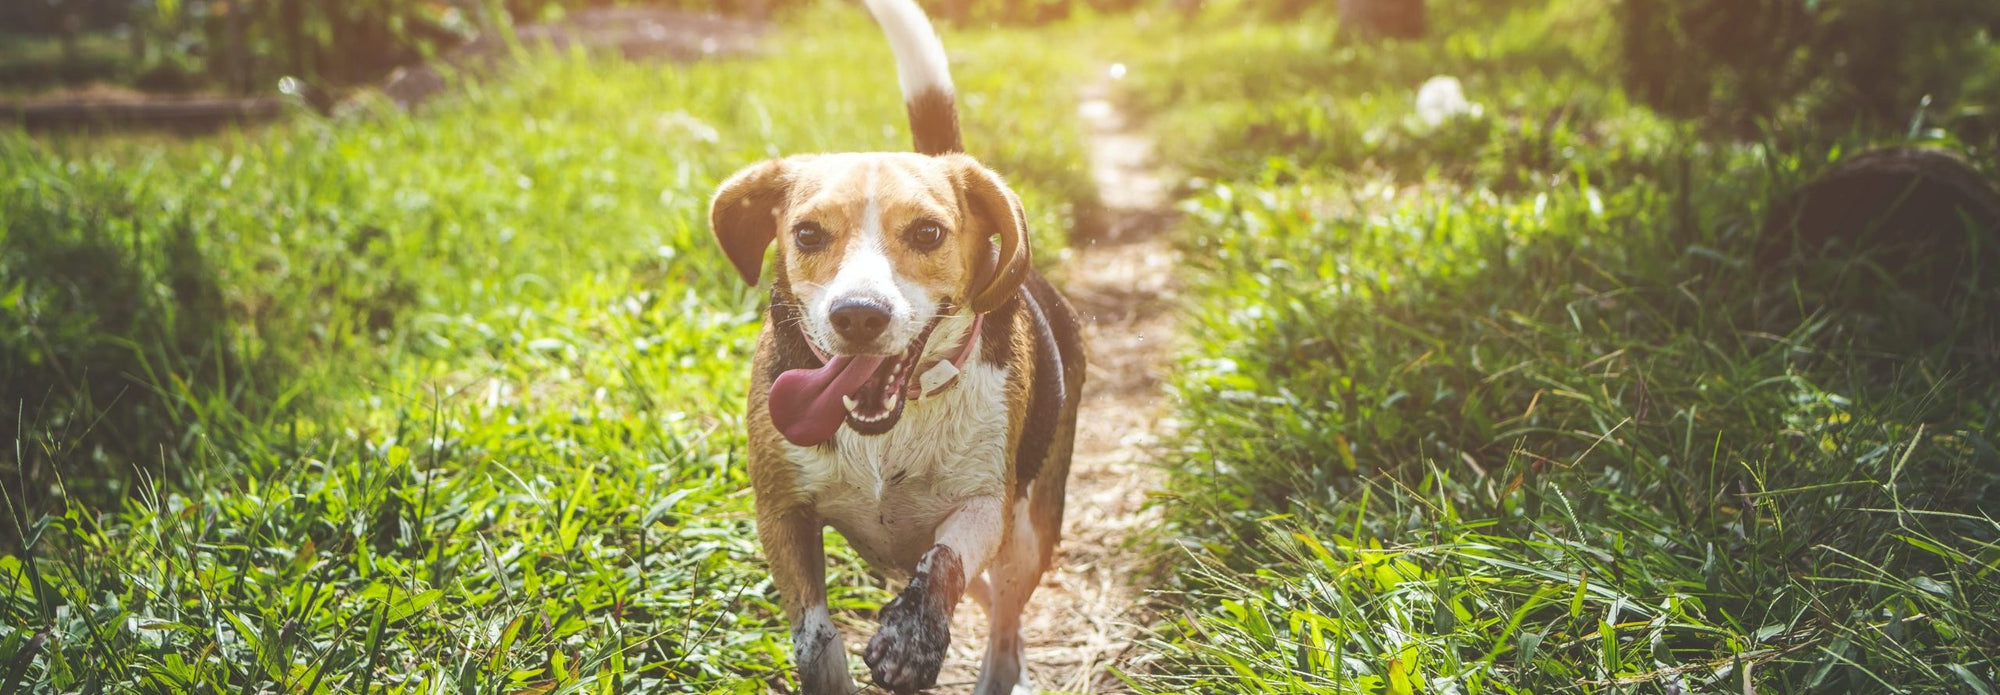 Beagle with its tongue hanging out running down a dirt path.